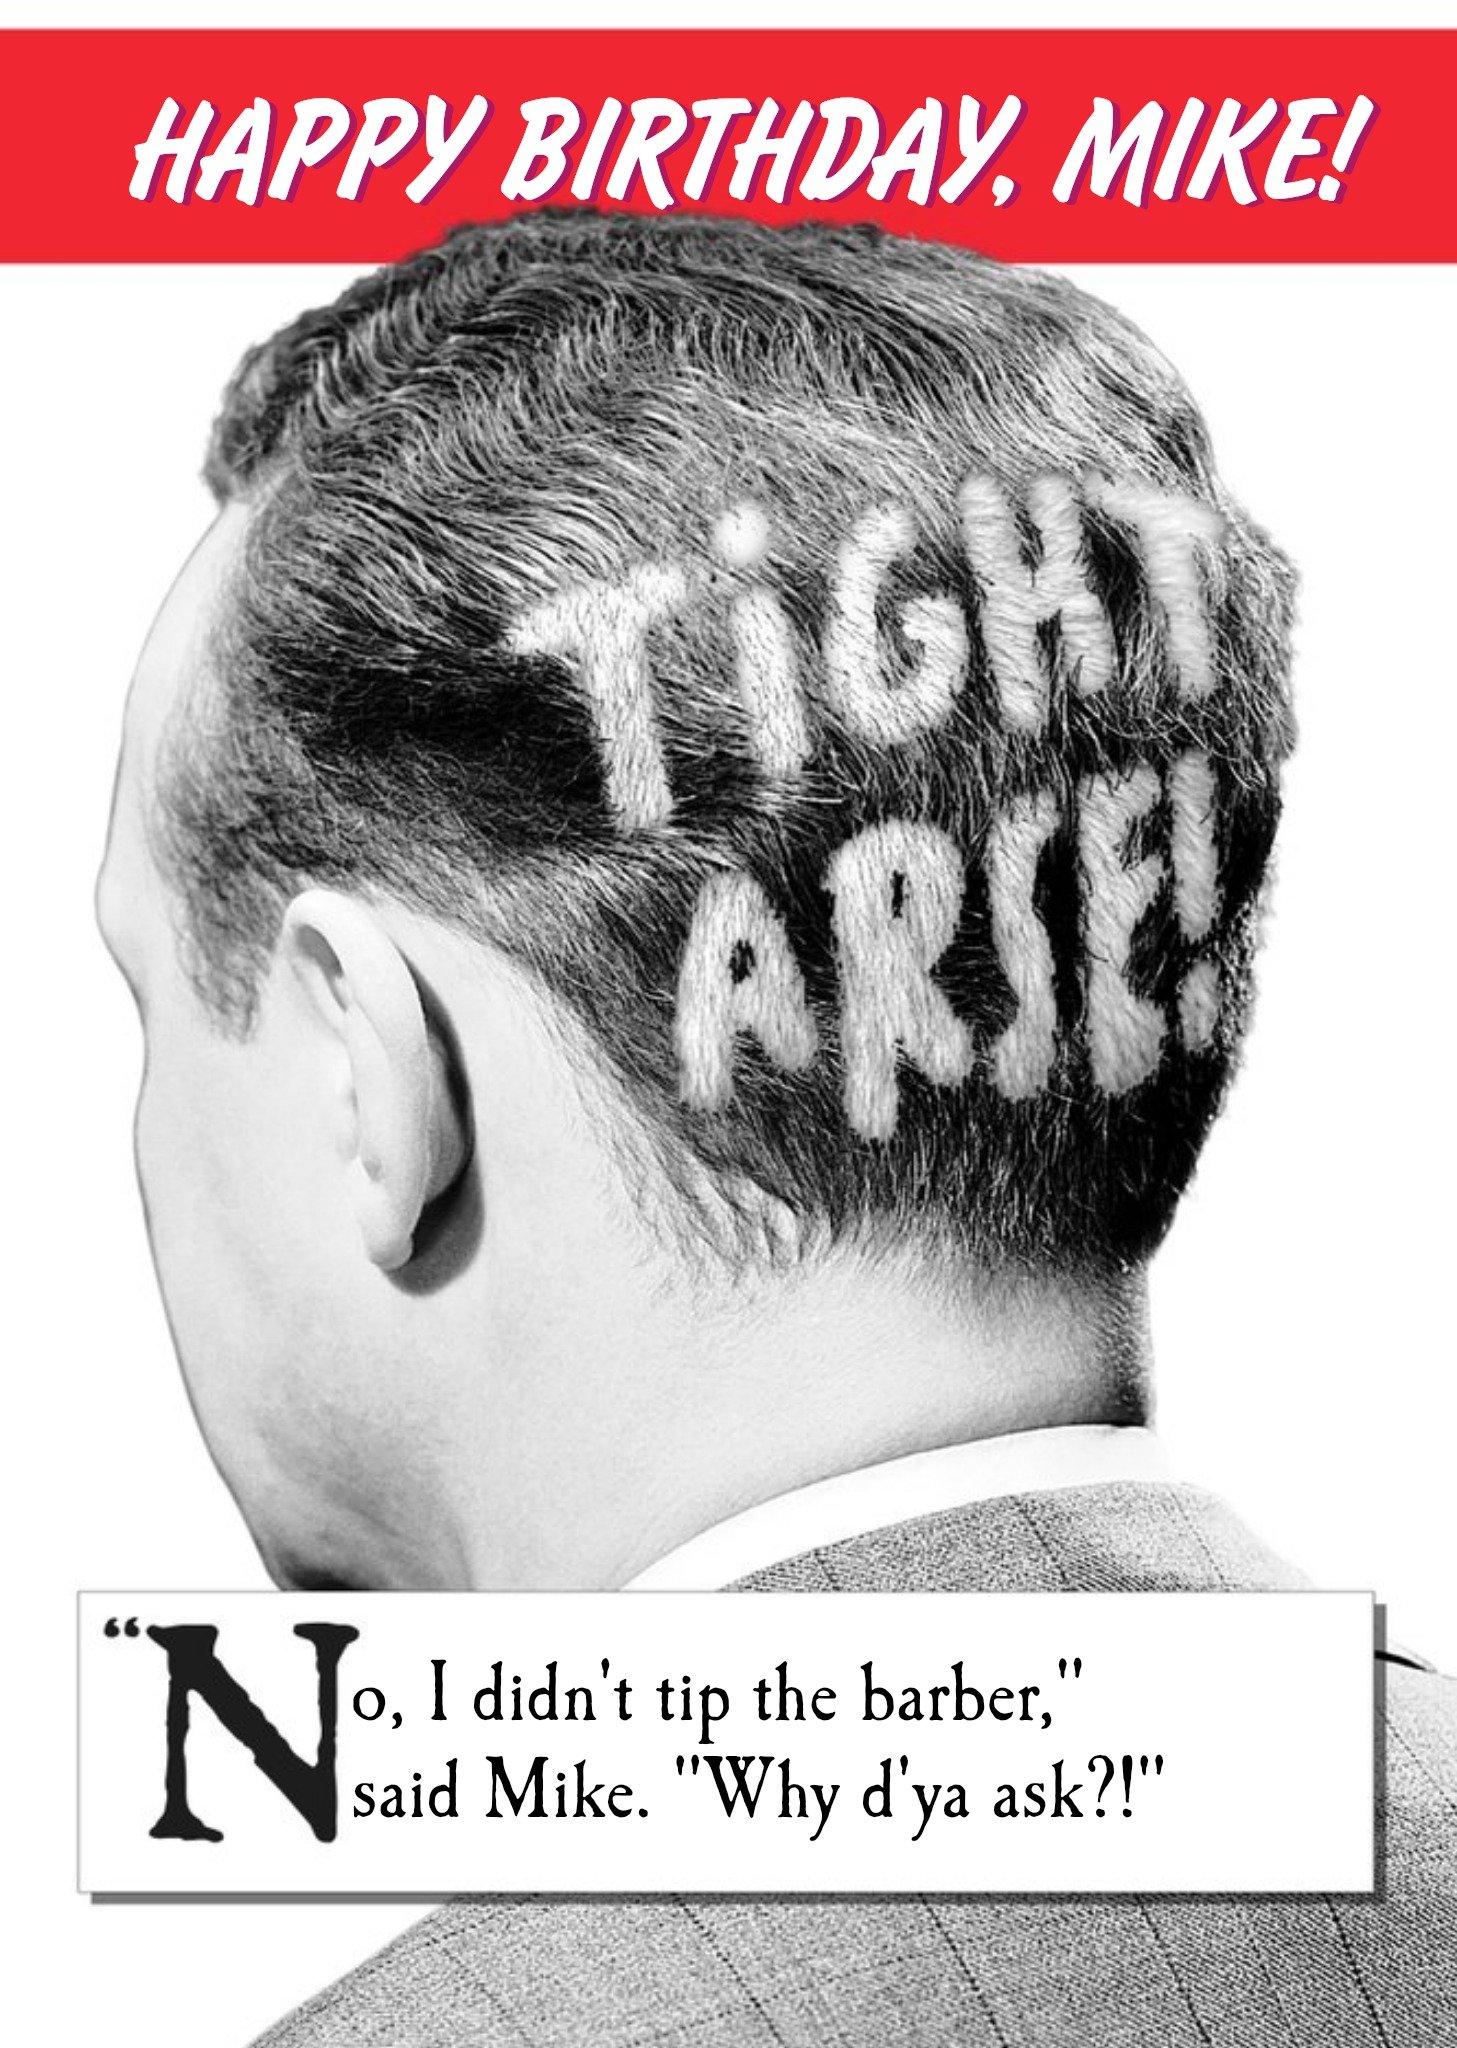 Moonpig Tight Arse Tip The Barber Humour Birthday Card, Large